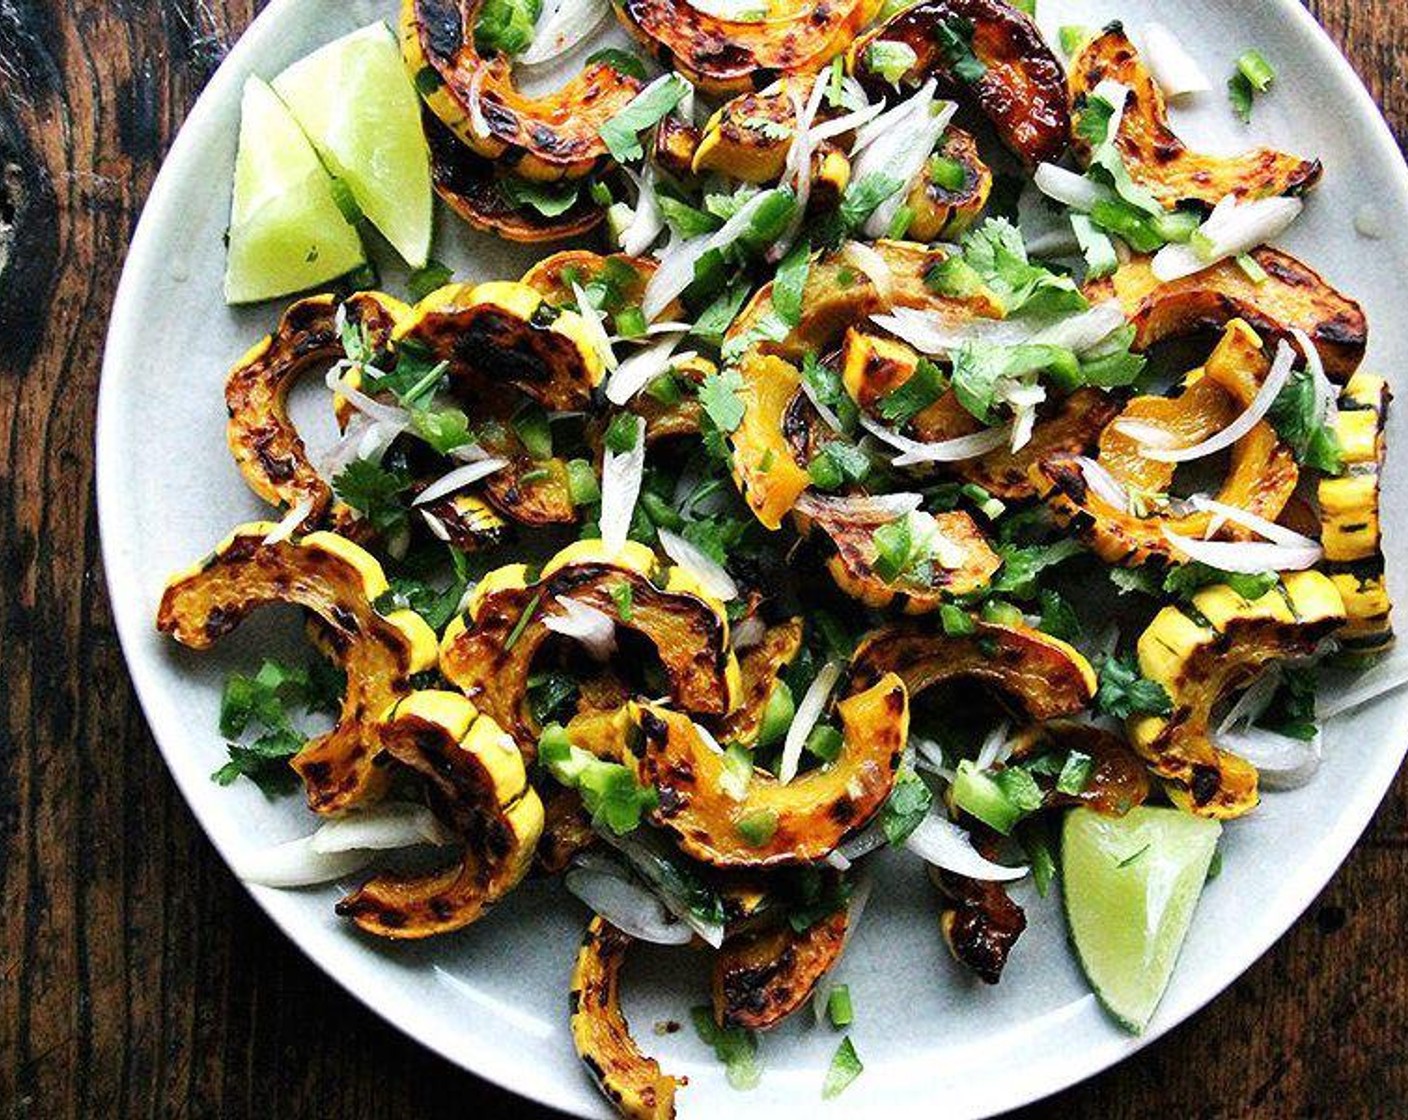 step 6 Arrange the squash slices on a platter. Scatter the macerated shallots and jalapeño over top. Scatter the Fresh Cilantro (1 bunch) over the top. Serve with the rest of the Lime (1/2) sliced into wedges on the side.